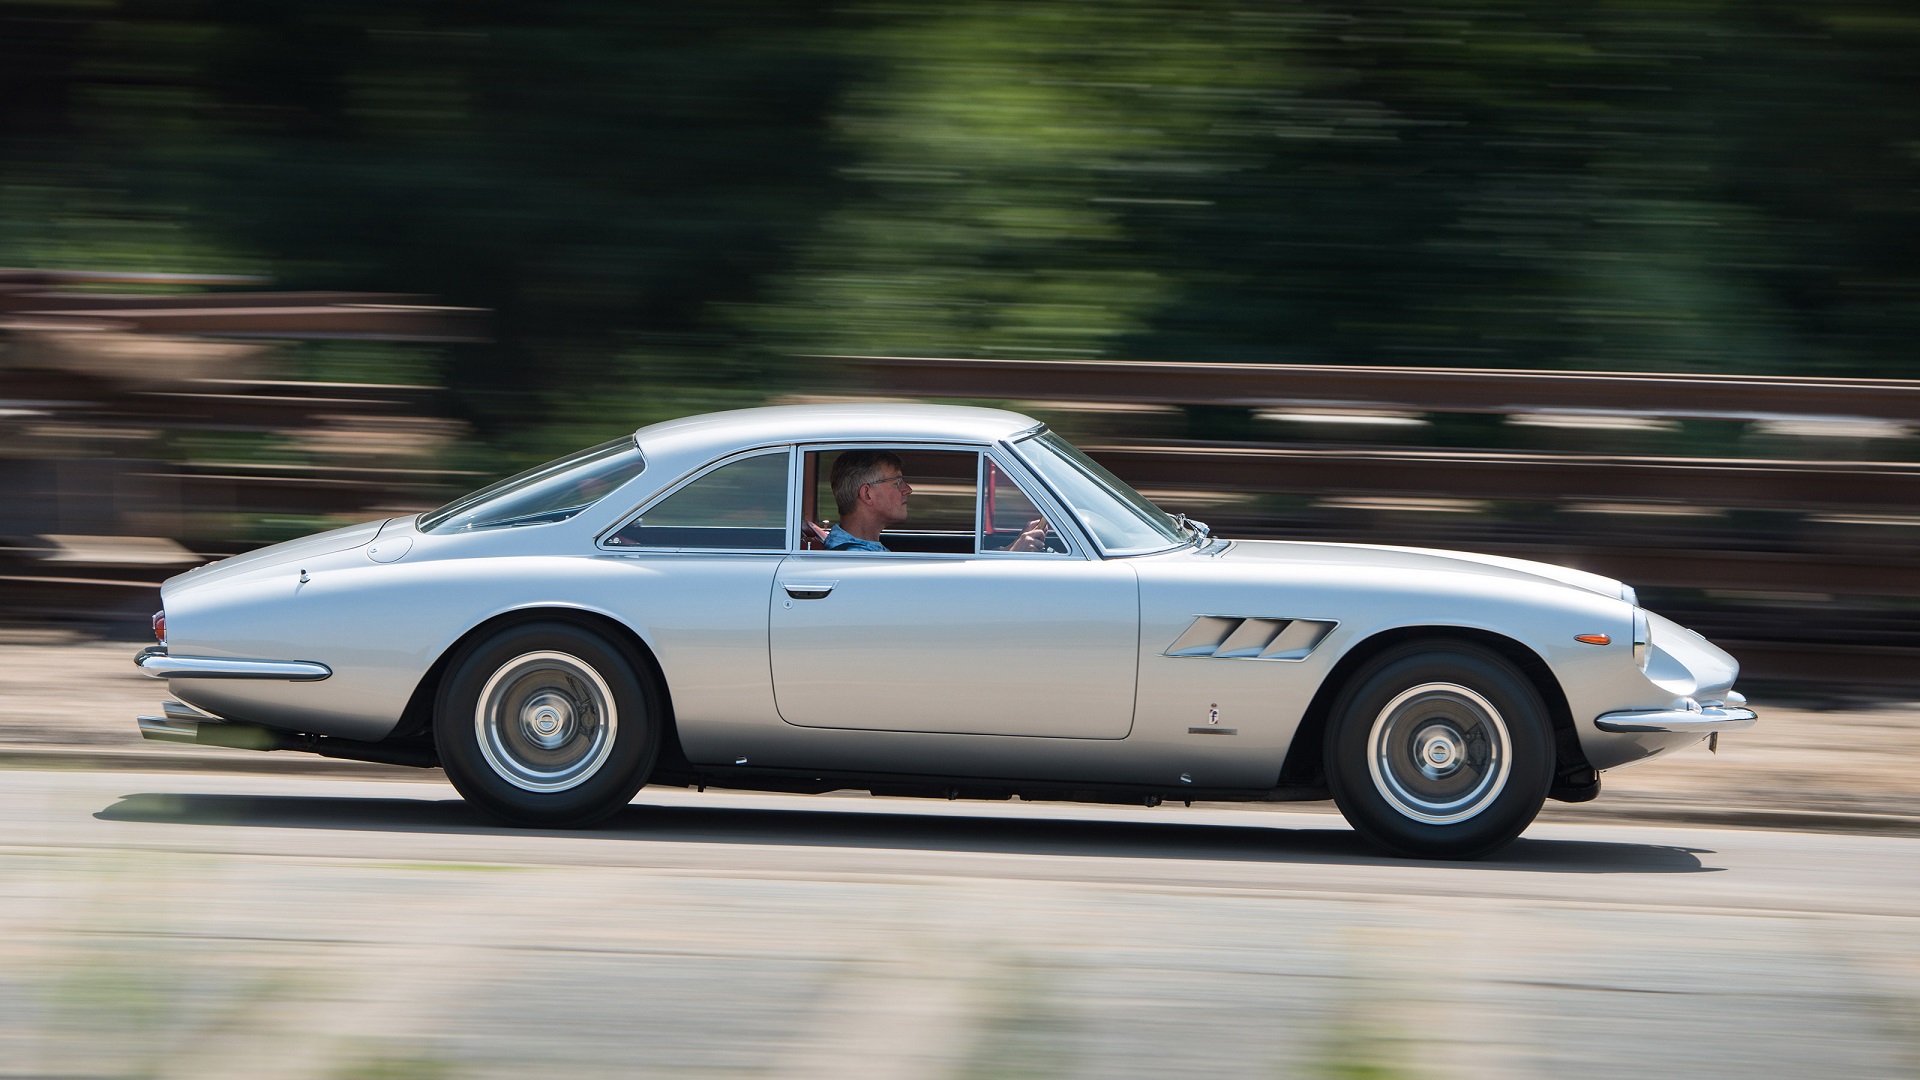 Image showing the side profile of a silver Ferrari 500 Superfast in a rolling shot.